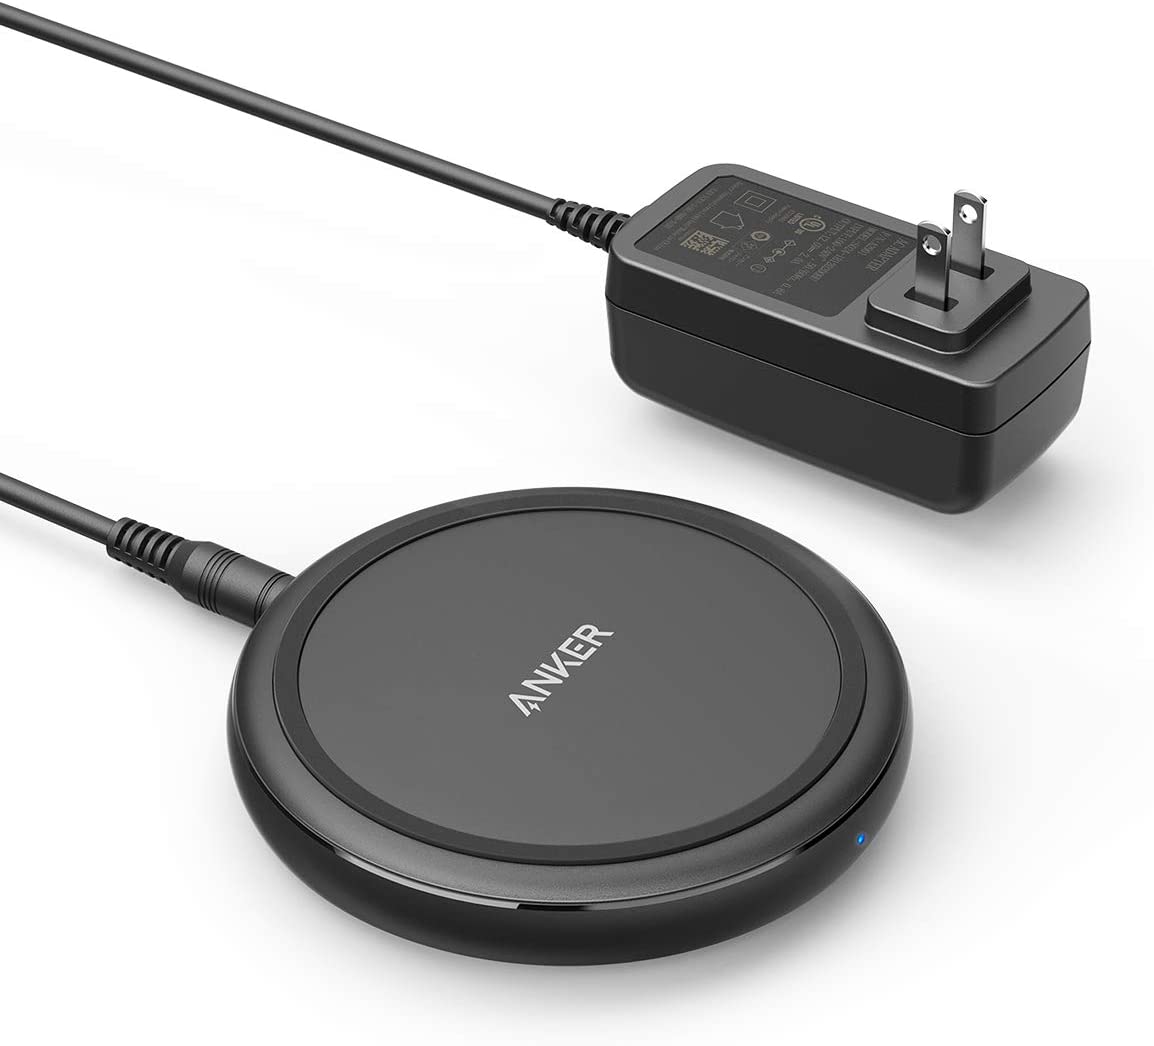 Anker 15W Wireless Charger Press Image